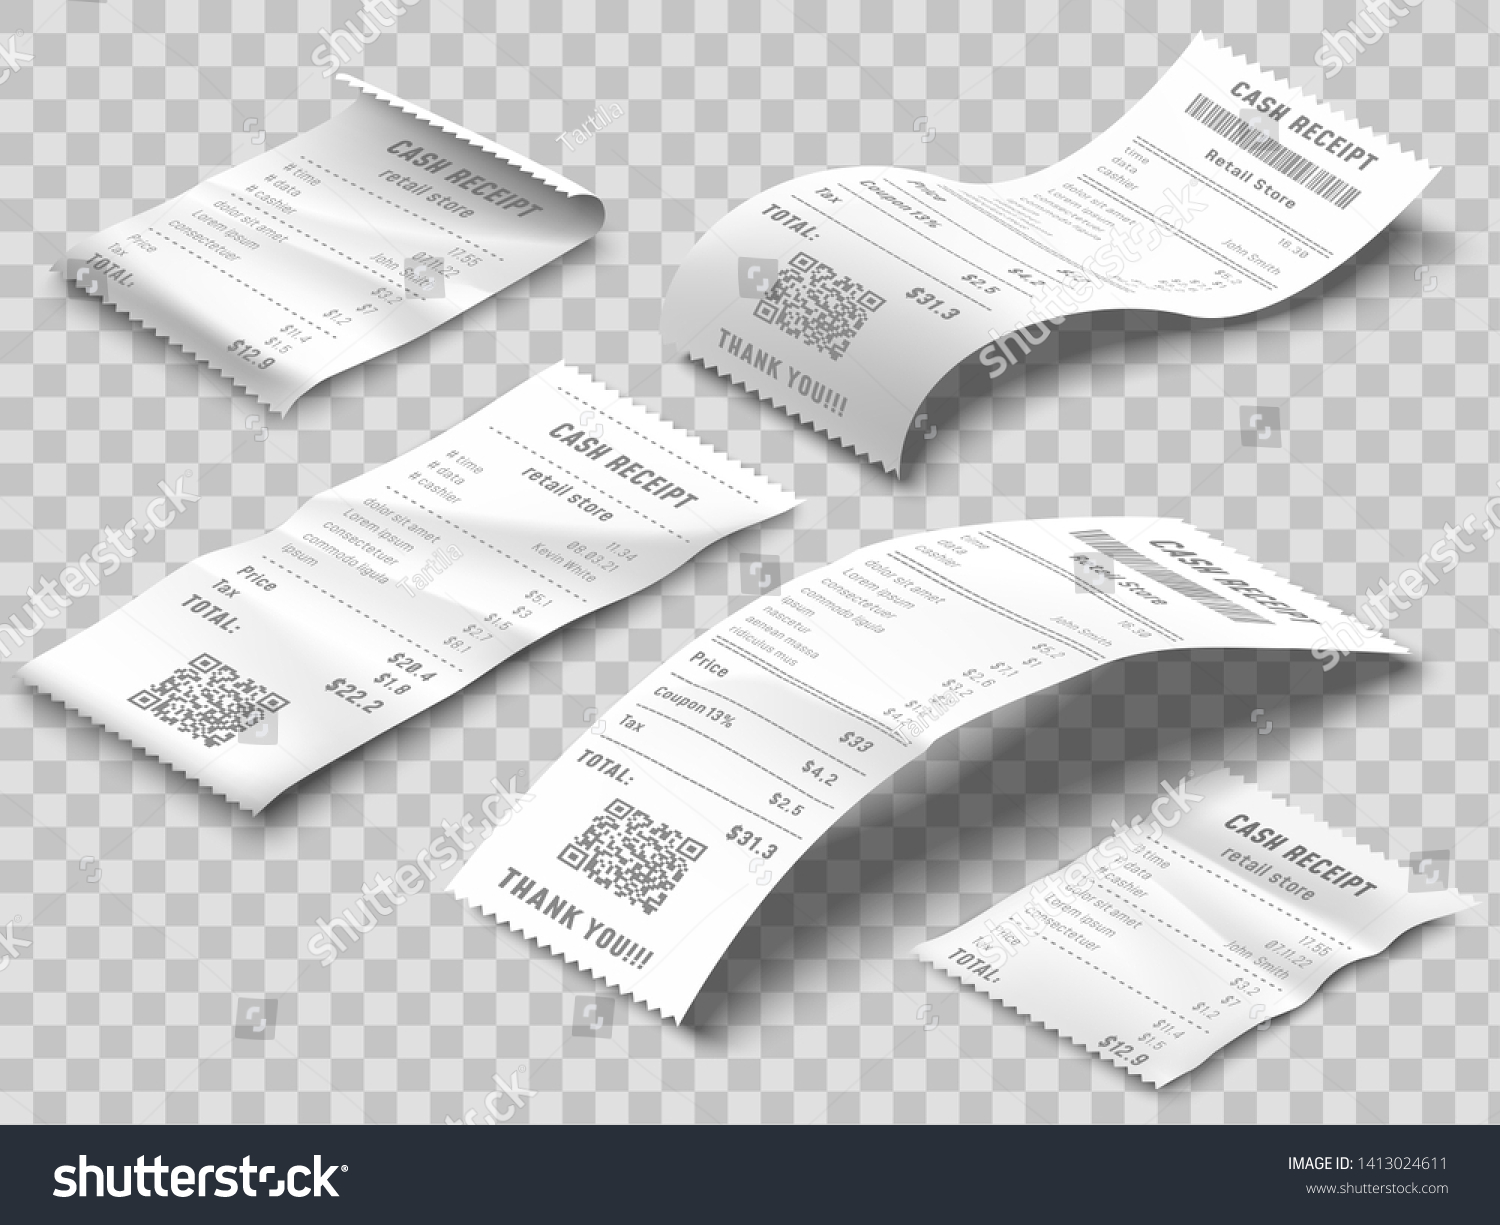 Isometric receipts bill. Printed billing receipt, payment bills and financial bank check print isolated realistic 3d vector set #1413024611